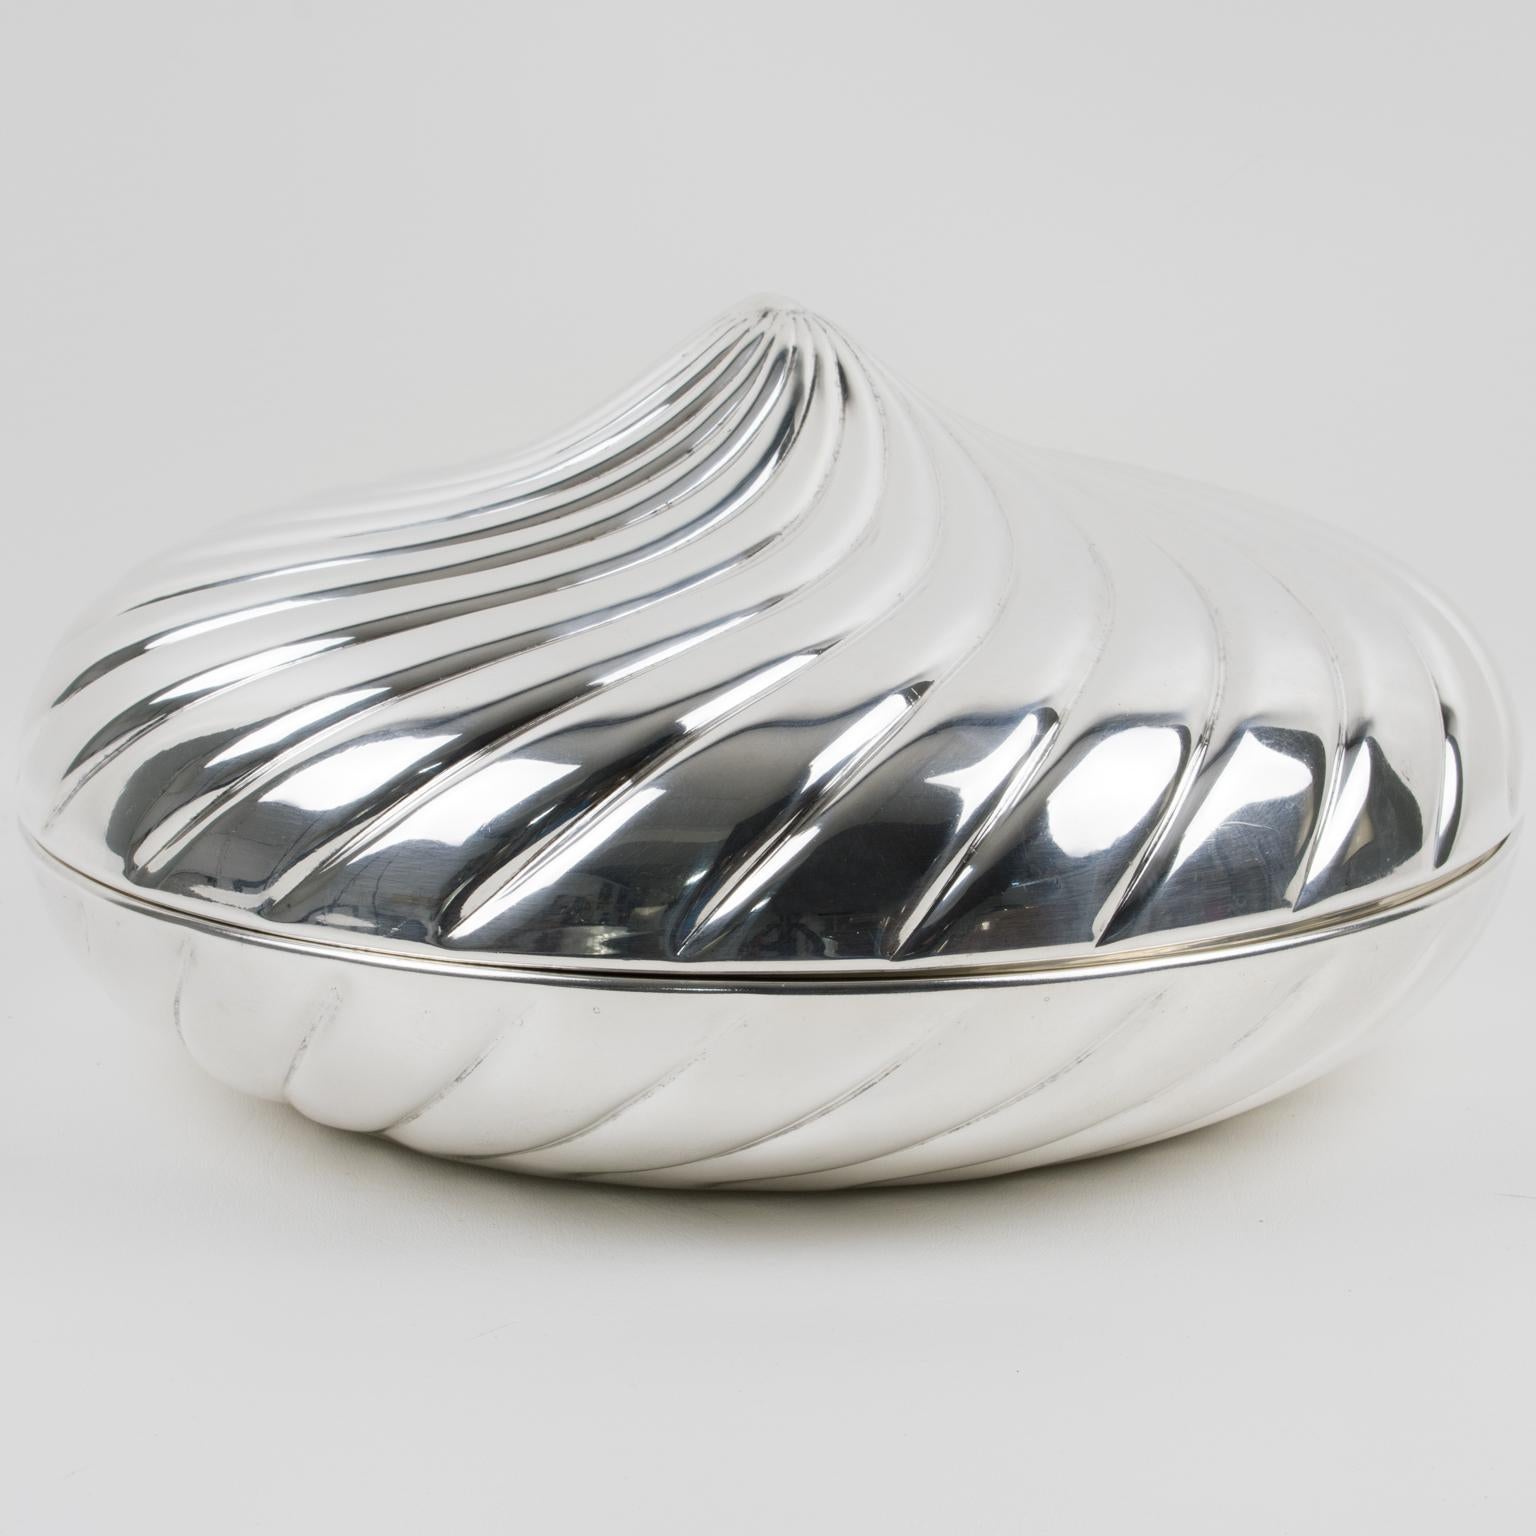 A fantastic silverplate-lidded decorative box created by Italian designer Egidio Broggi, Milano. This impressive box features an oversized round shape with a swirled design like a giant meringue. The box is gold-plated inside the container and lid.